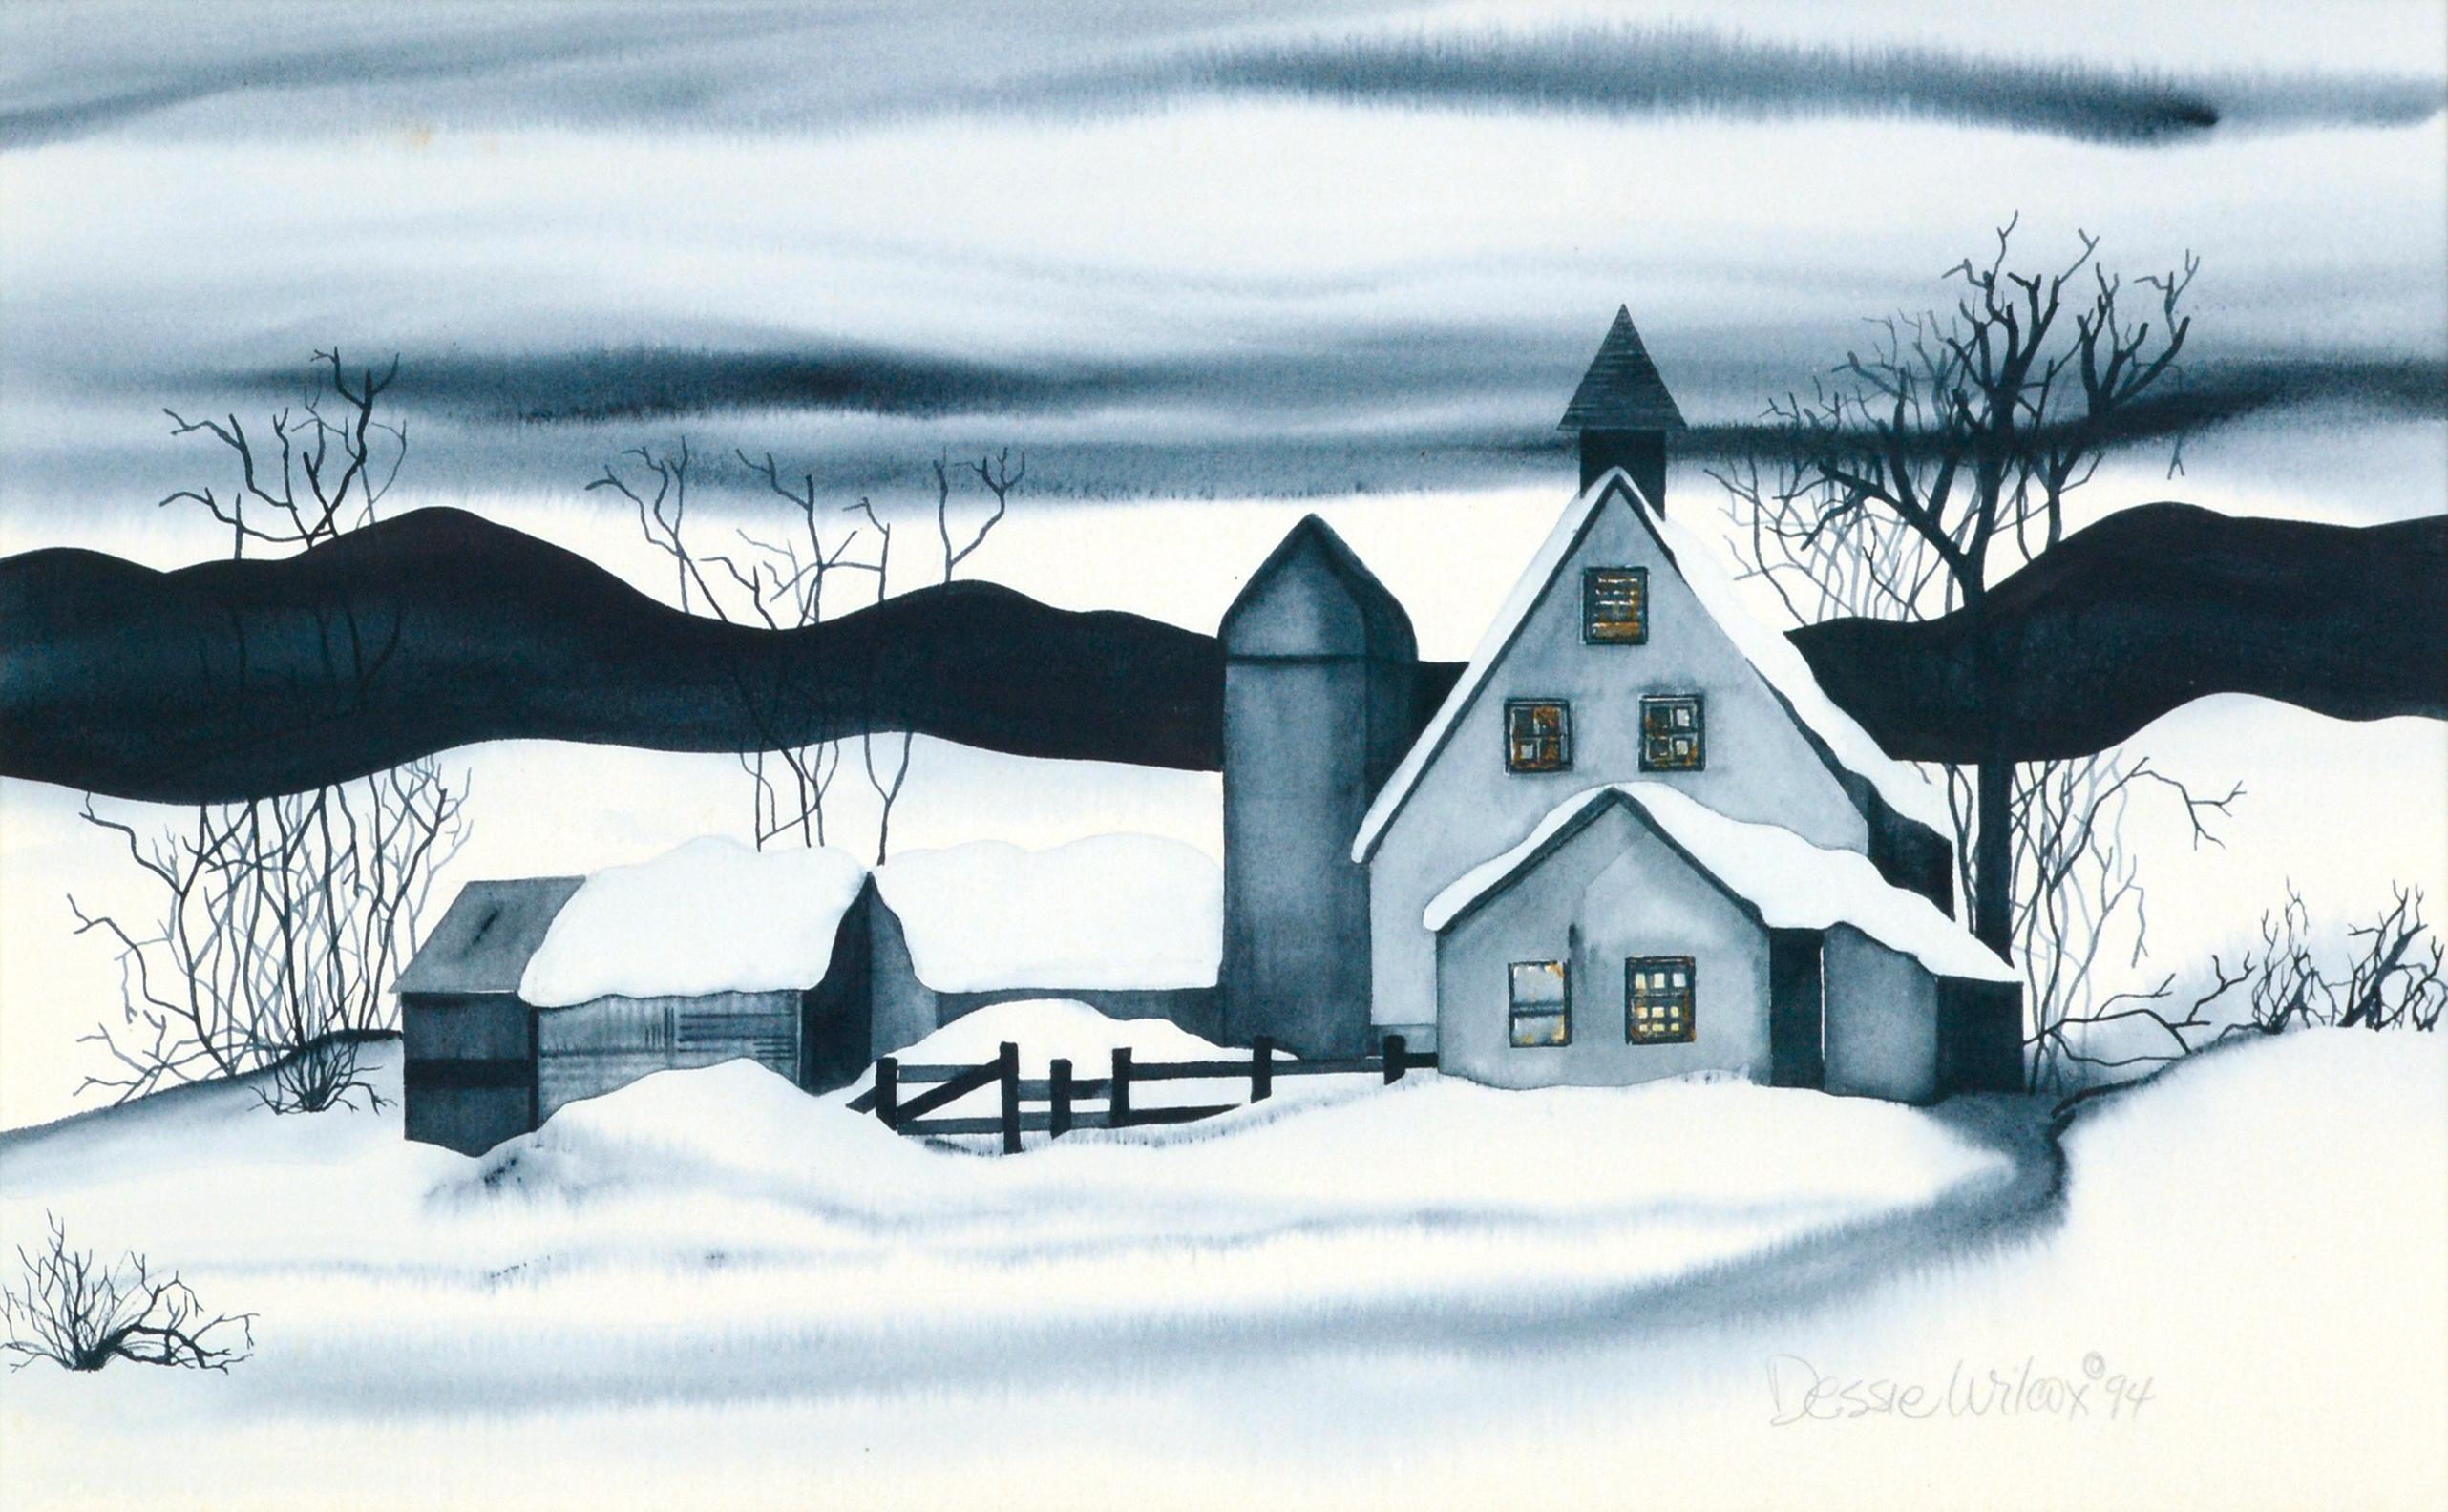 Country House in the Snow - Landscape - Art by Dessie Wilcox